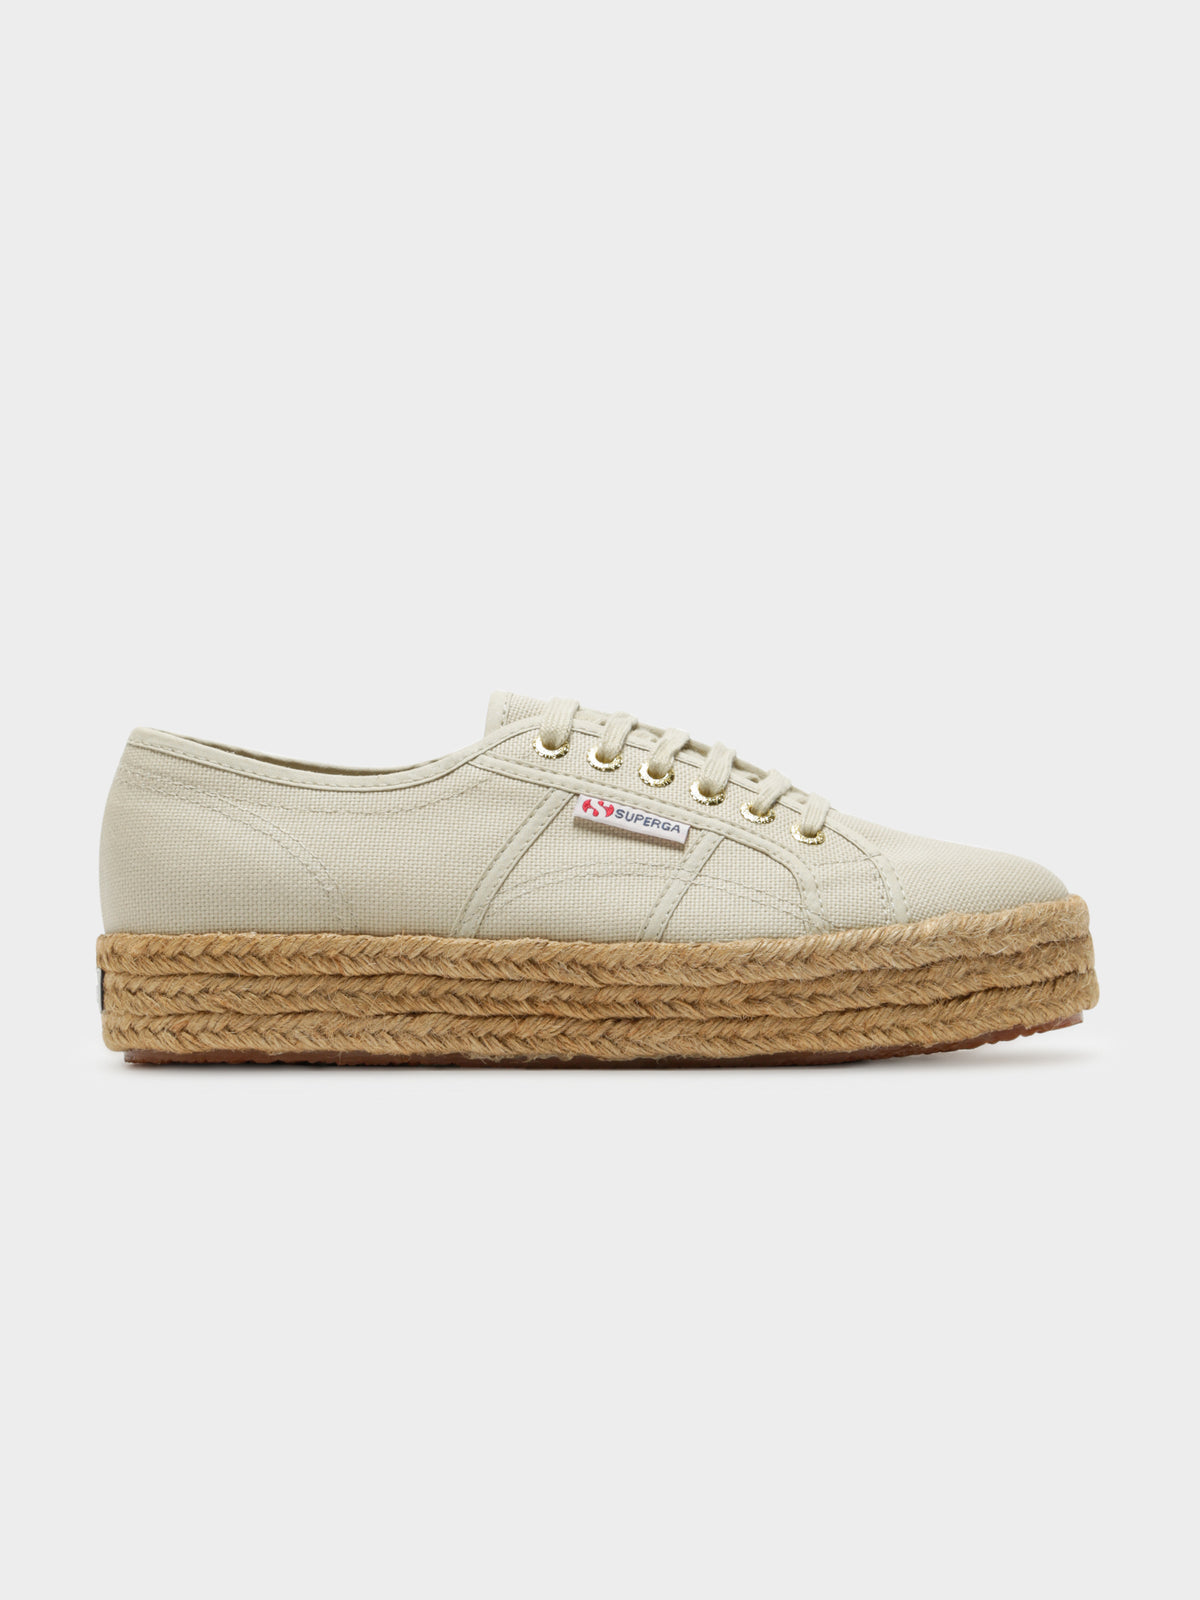 Womens 2730 Cotropew 94 Sneakers in Taupe